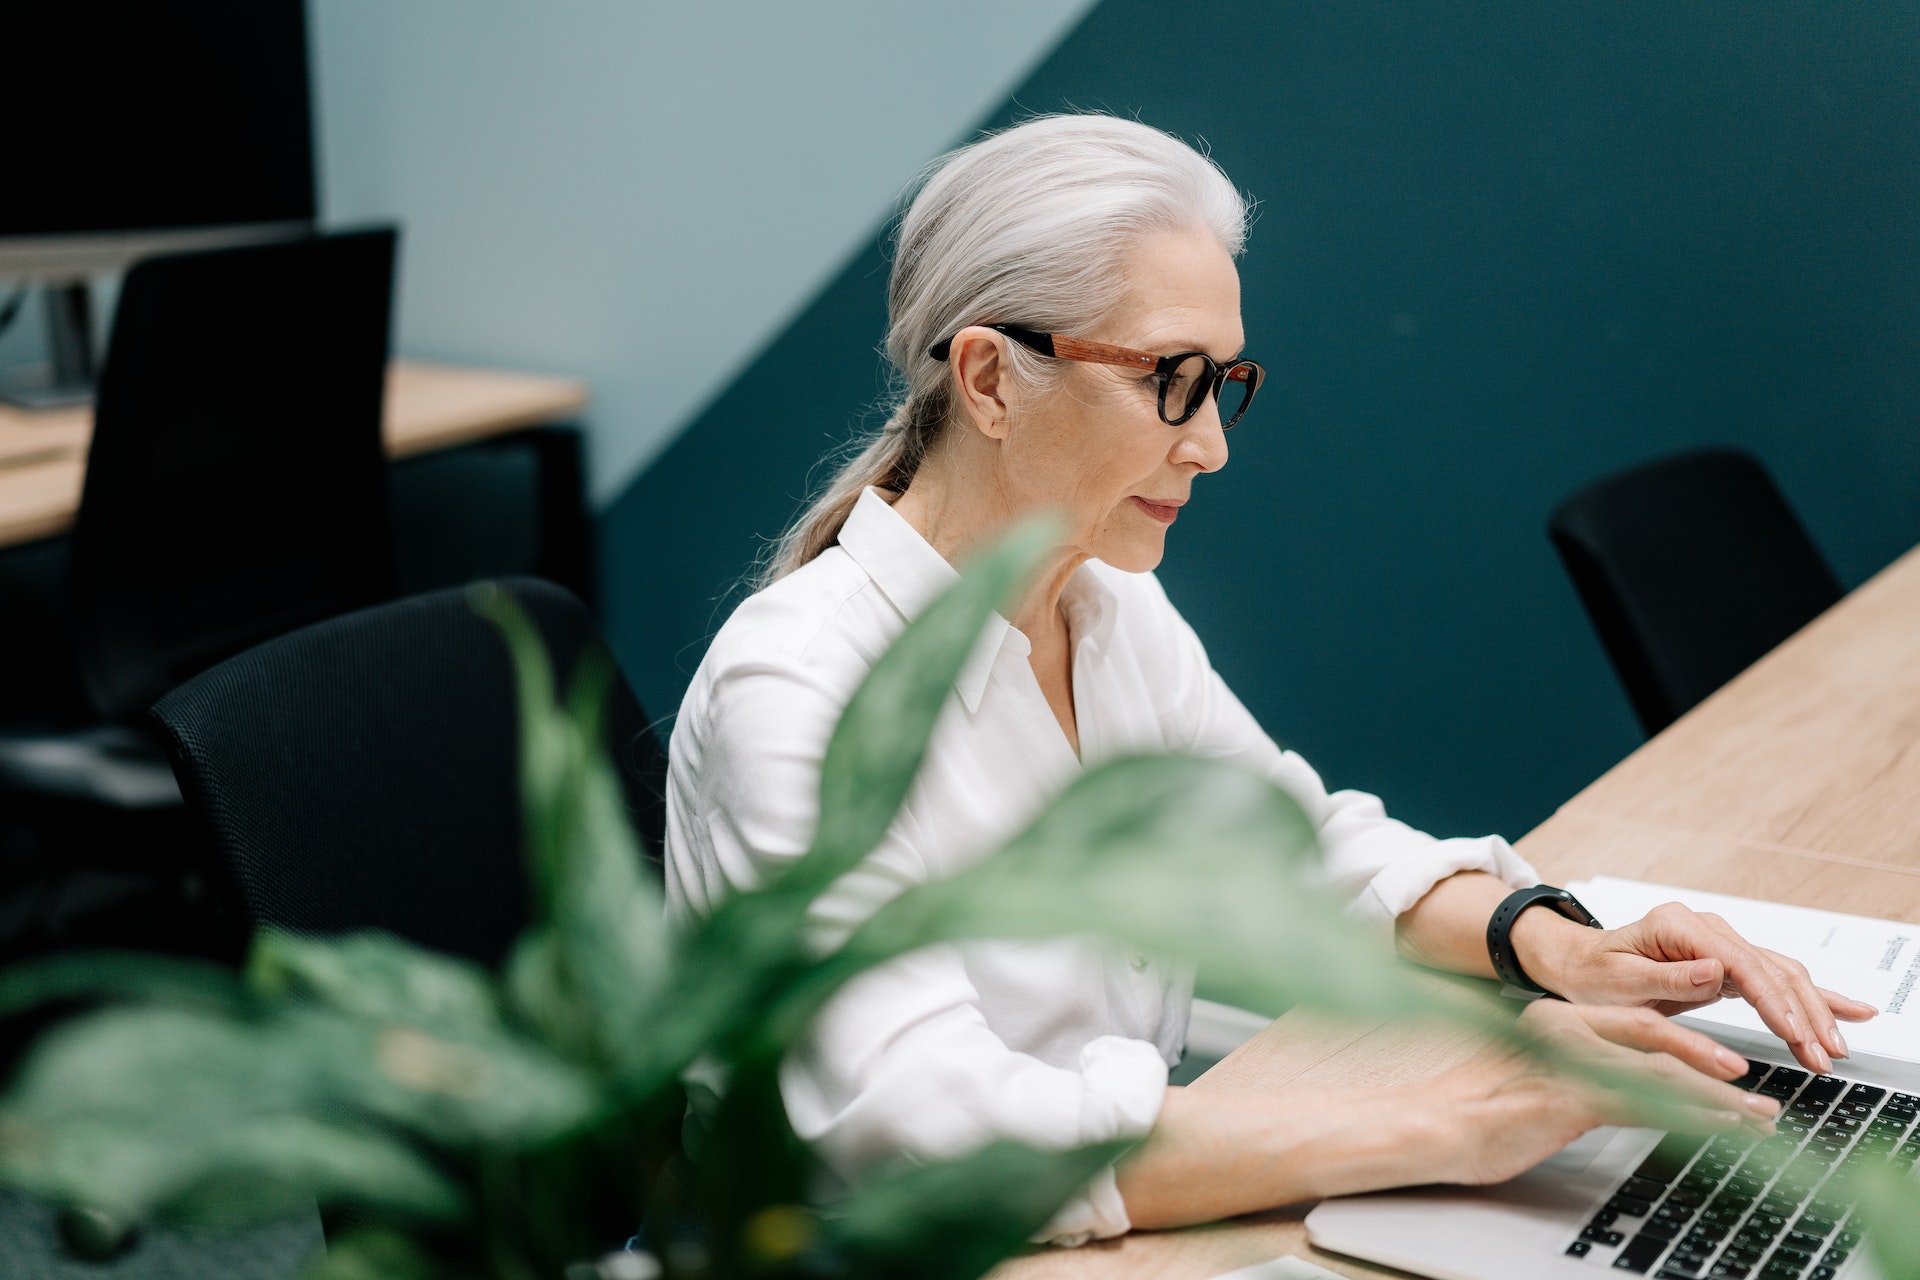 A woman working in an office | Source: Pexels